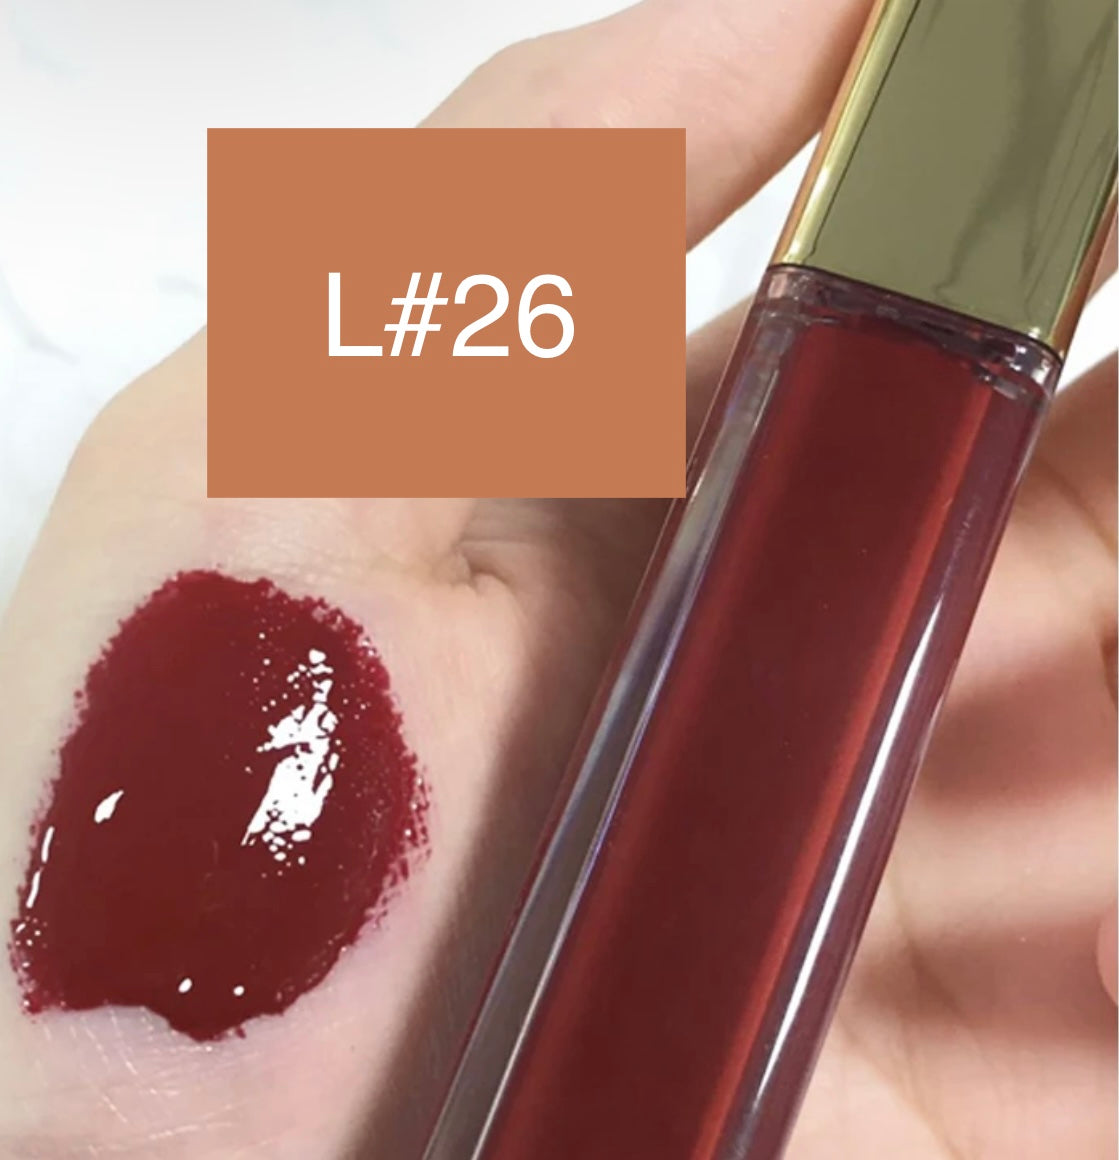 High-Shine Vegan Lip Gloss in variant of L26, providing a vibrant L26 with a glossy shine